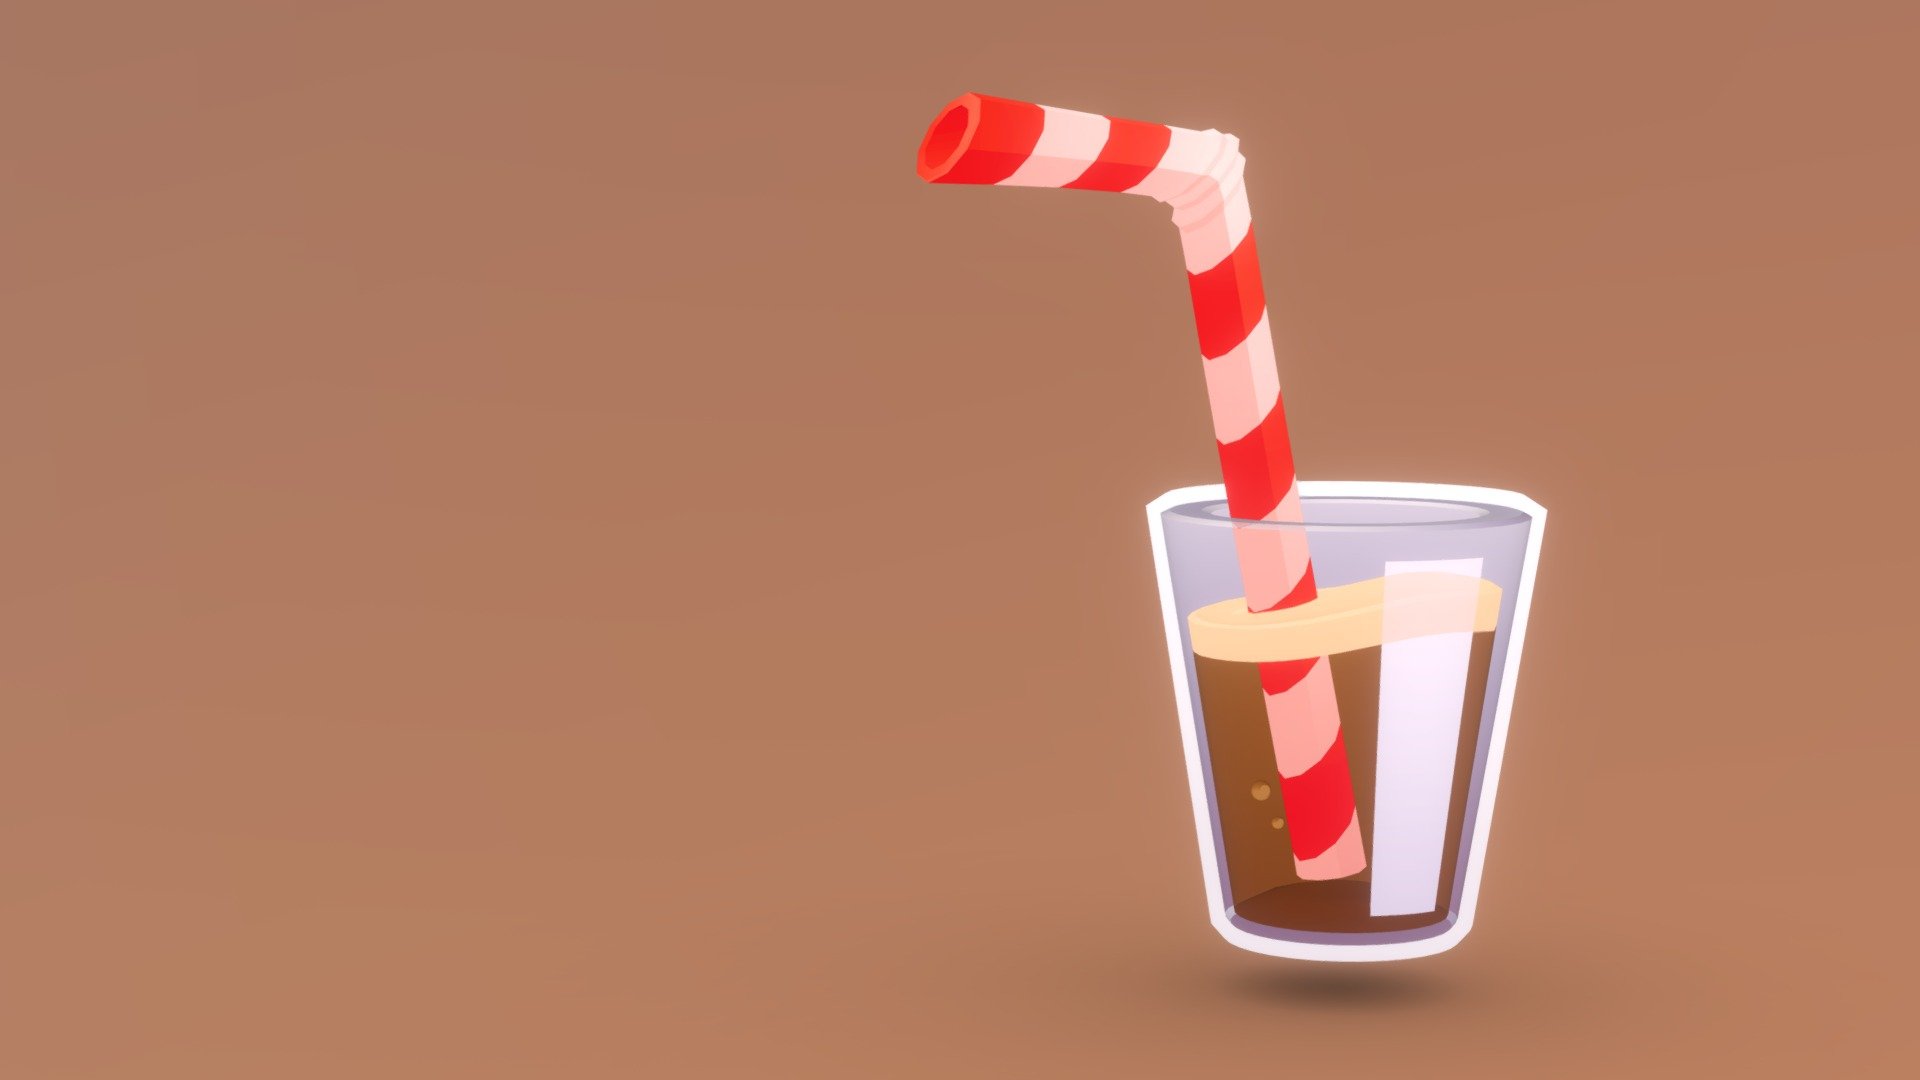 **Low poly cute iced coffee drinks  **

Textured with gradient atlas, so it is performant for mobile games and video games.

There are 2 materials, the glass and the liquid are slightly transparent.

Like a few of my other assets in the same style, it uses a single texture diffuse map and is mapped using only color gradients. 
All gradient textures can be extended and combined to a large atlas 3d model